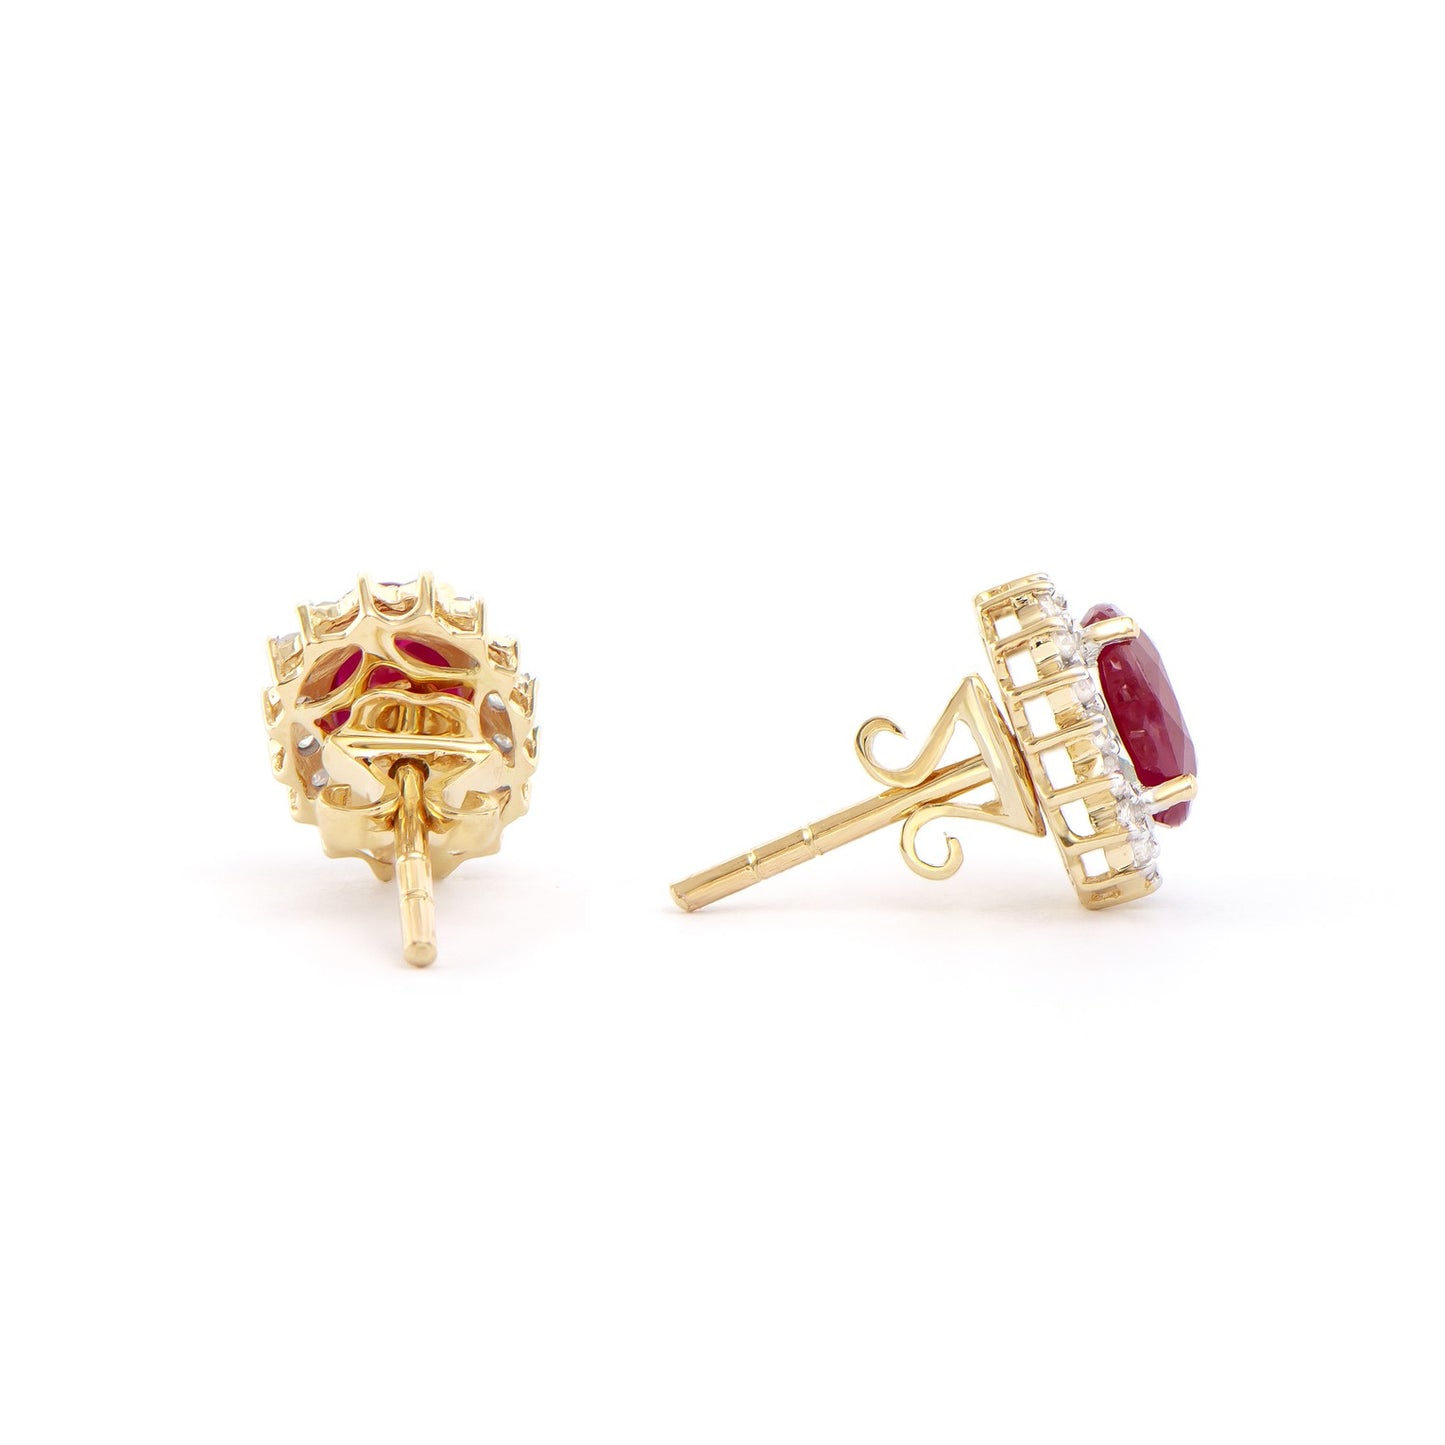 14KT Yellow Gold 2.05ctw Ruby and Diamond Earrings